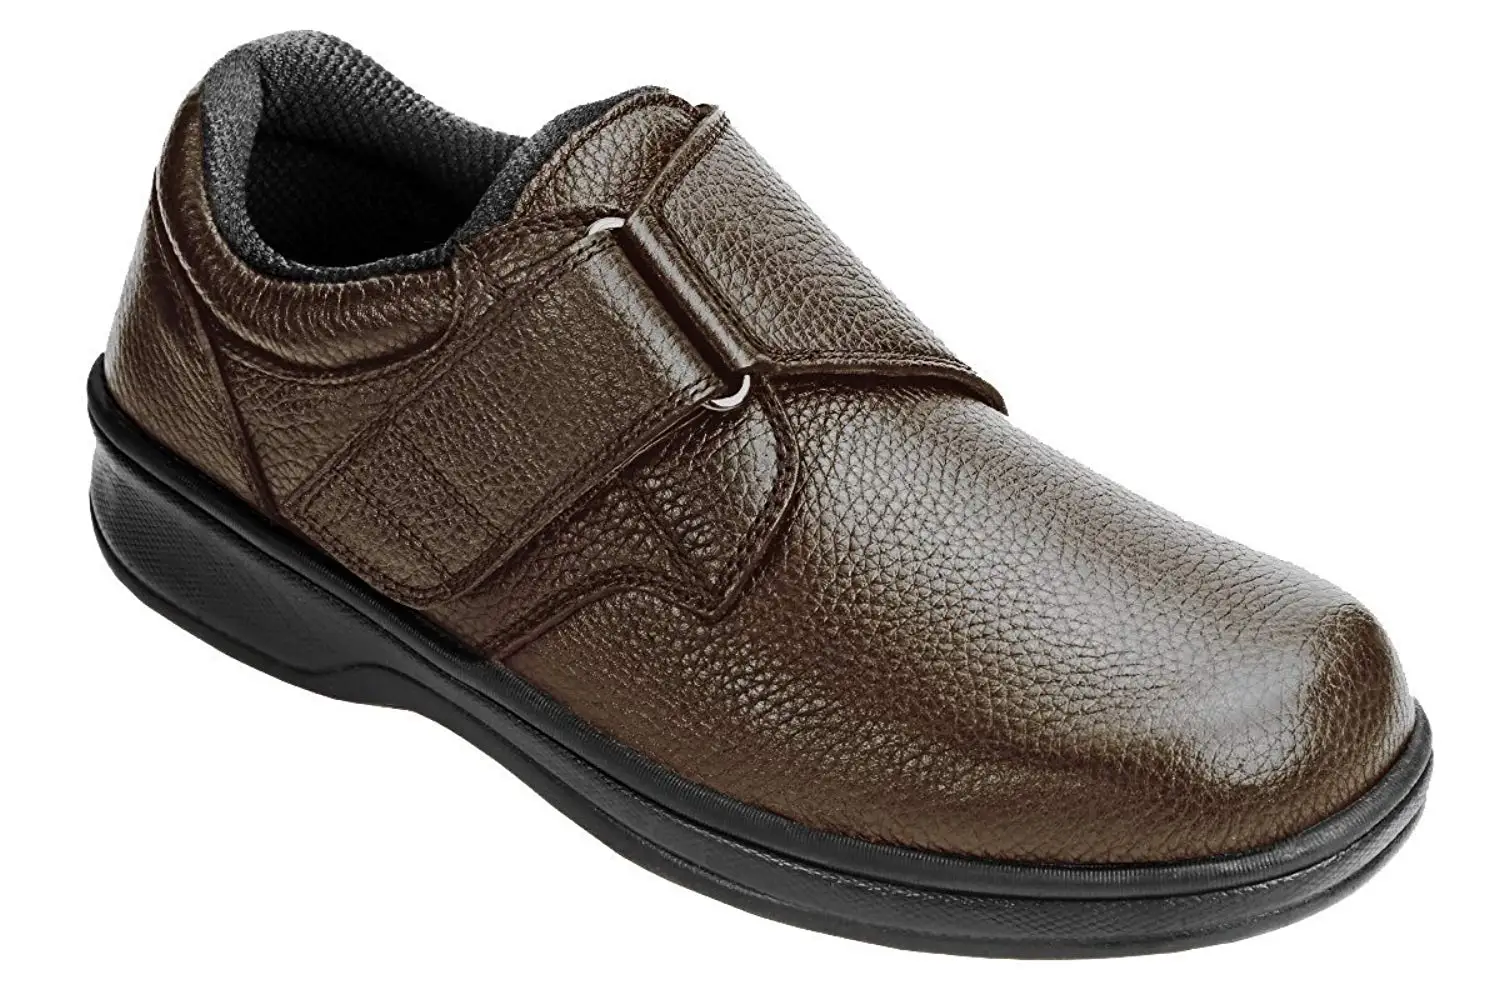 Cheap Mens Wide Velcro Shoes, find Mens 